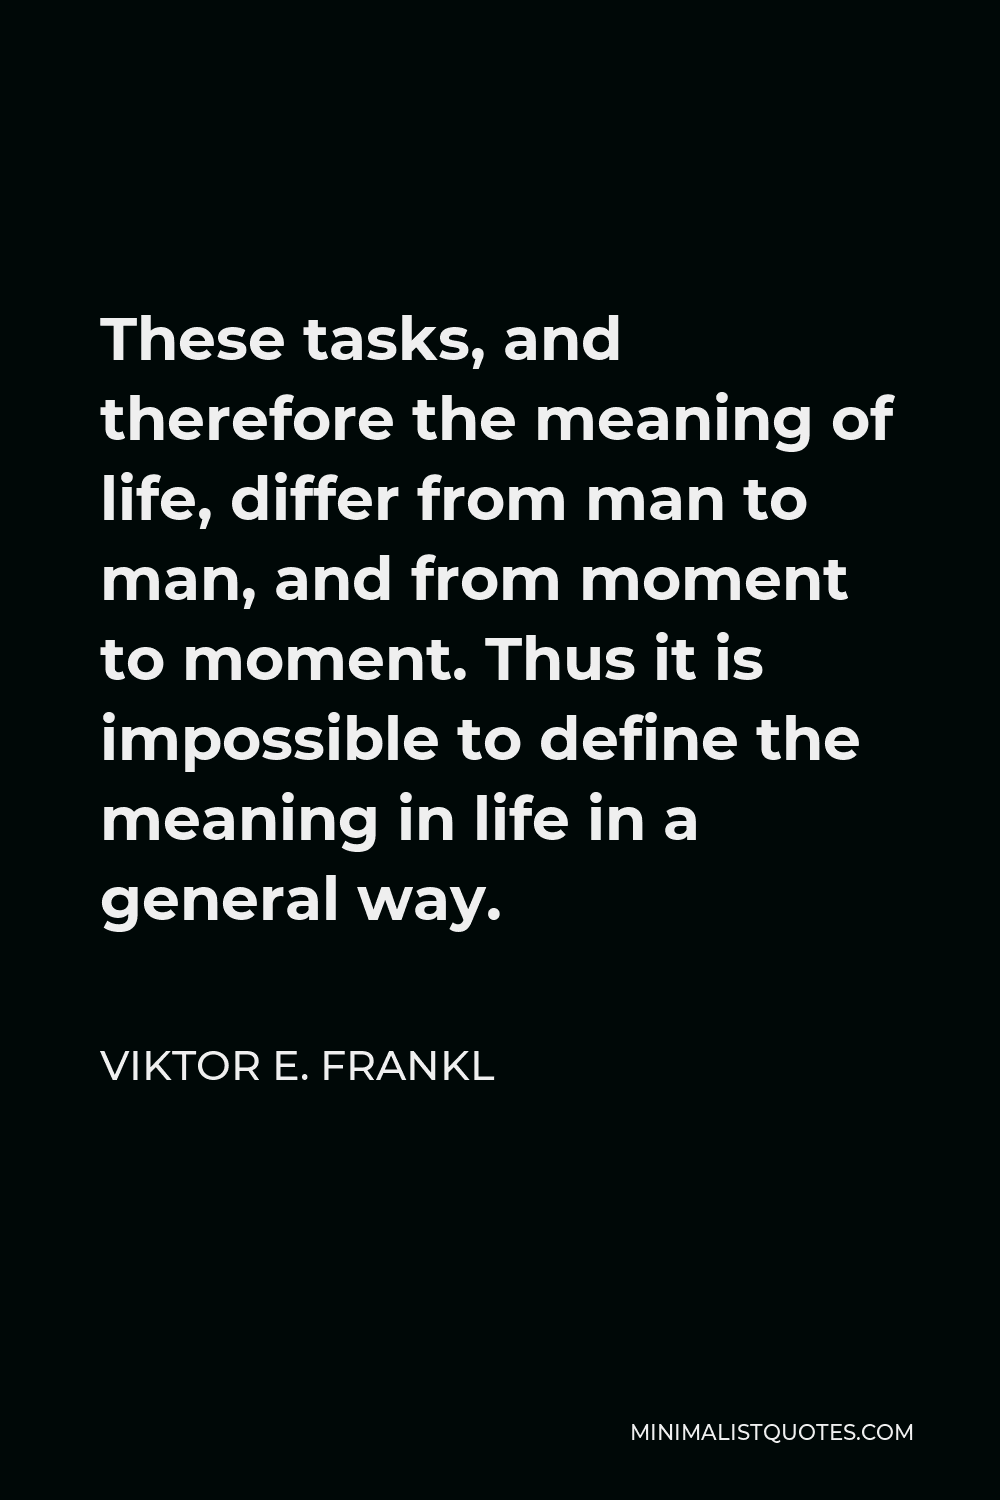 Viktor E. Frankl Quote - These tasks, and therefore the meaning of life, differ from man to man, and from moment to moment. Thus it is impossible to define the meaning in life in a general way.